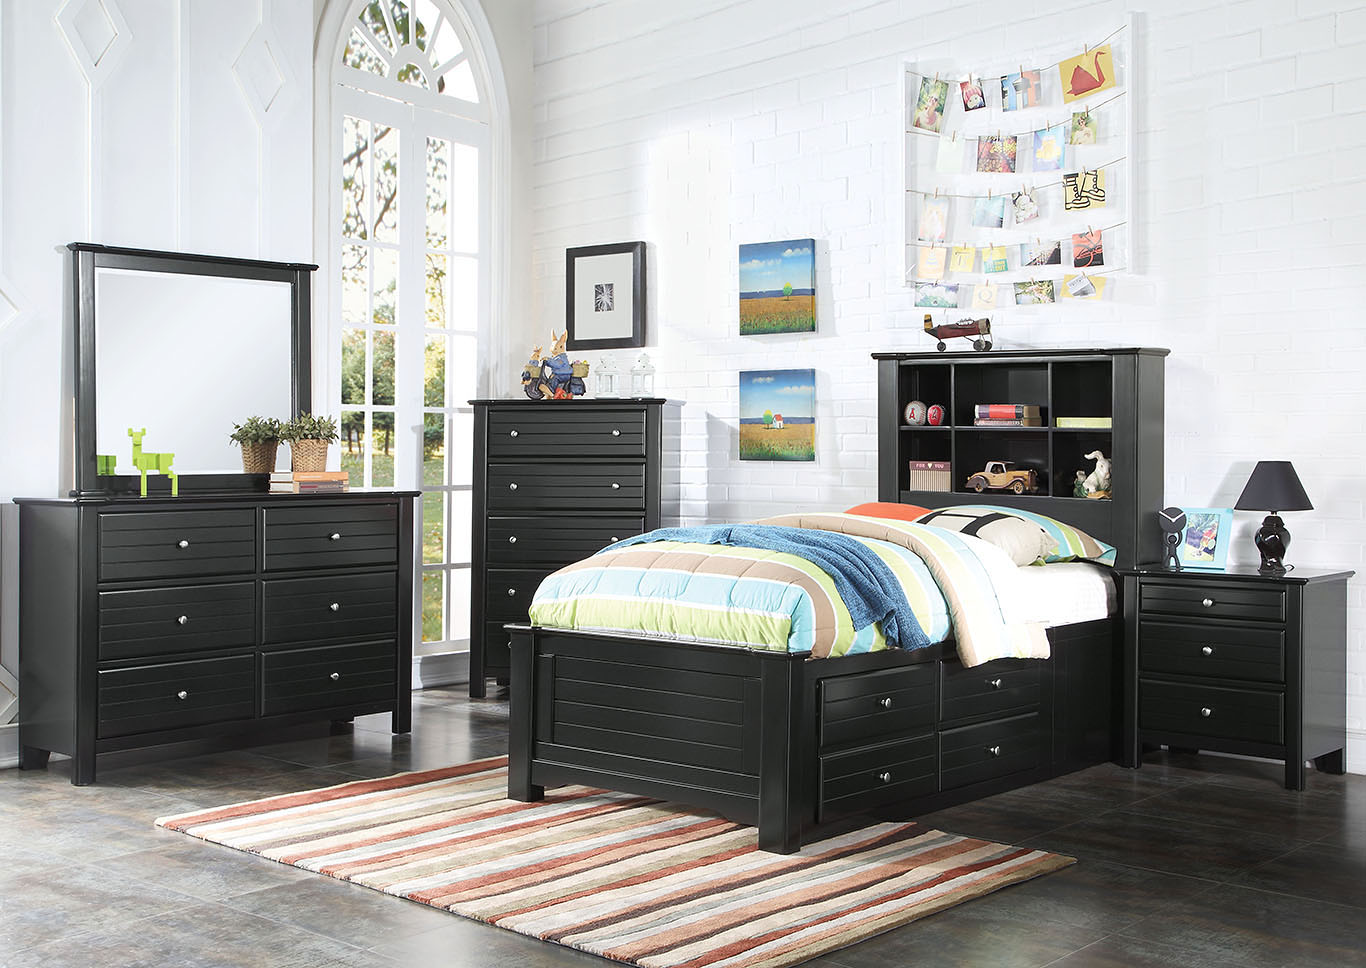 Ace Furniture And Decor Mallowsea Black Twin Storage Bed W Dresser